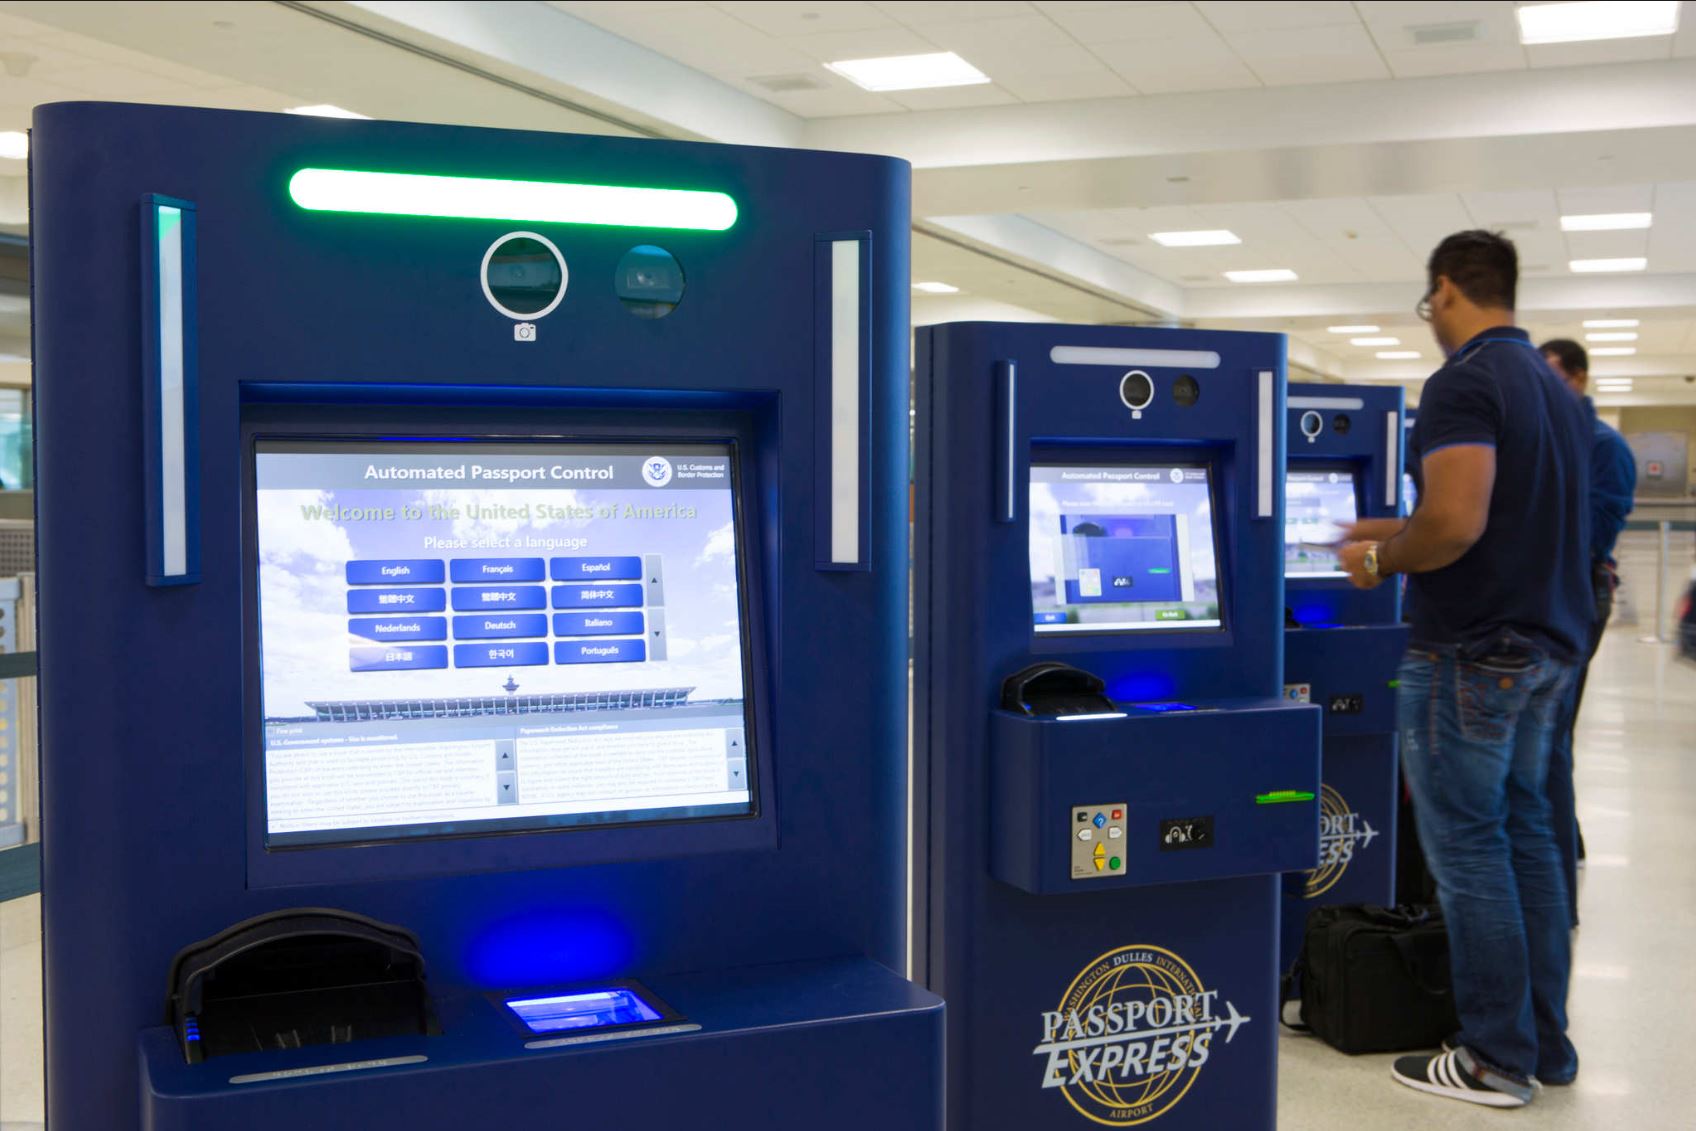 What Are Automated Passport Control and Mobile Passport Control?